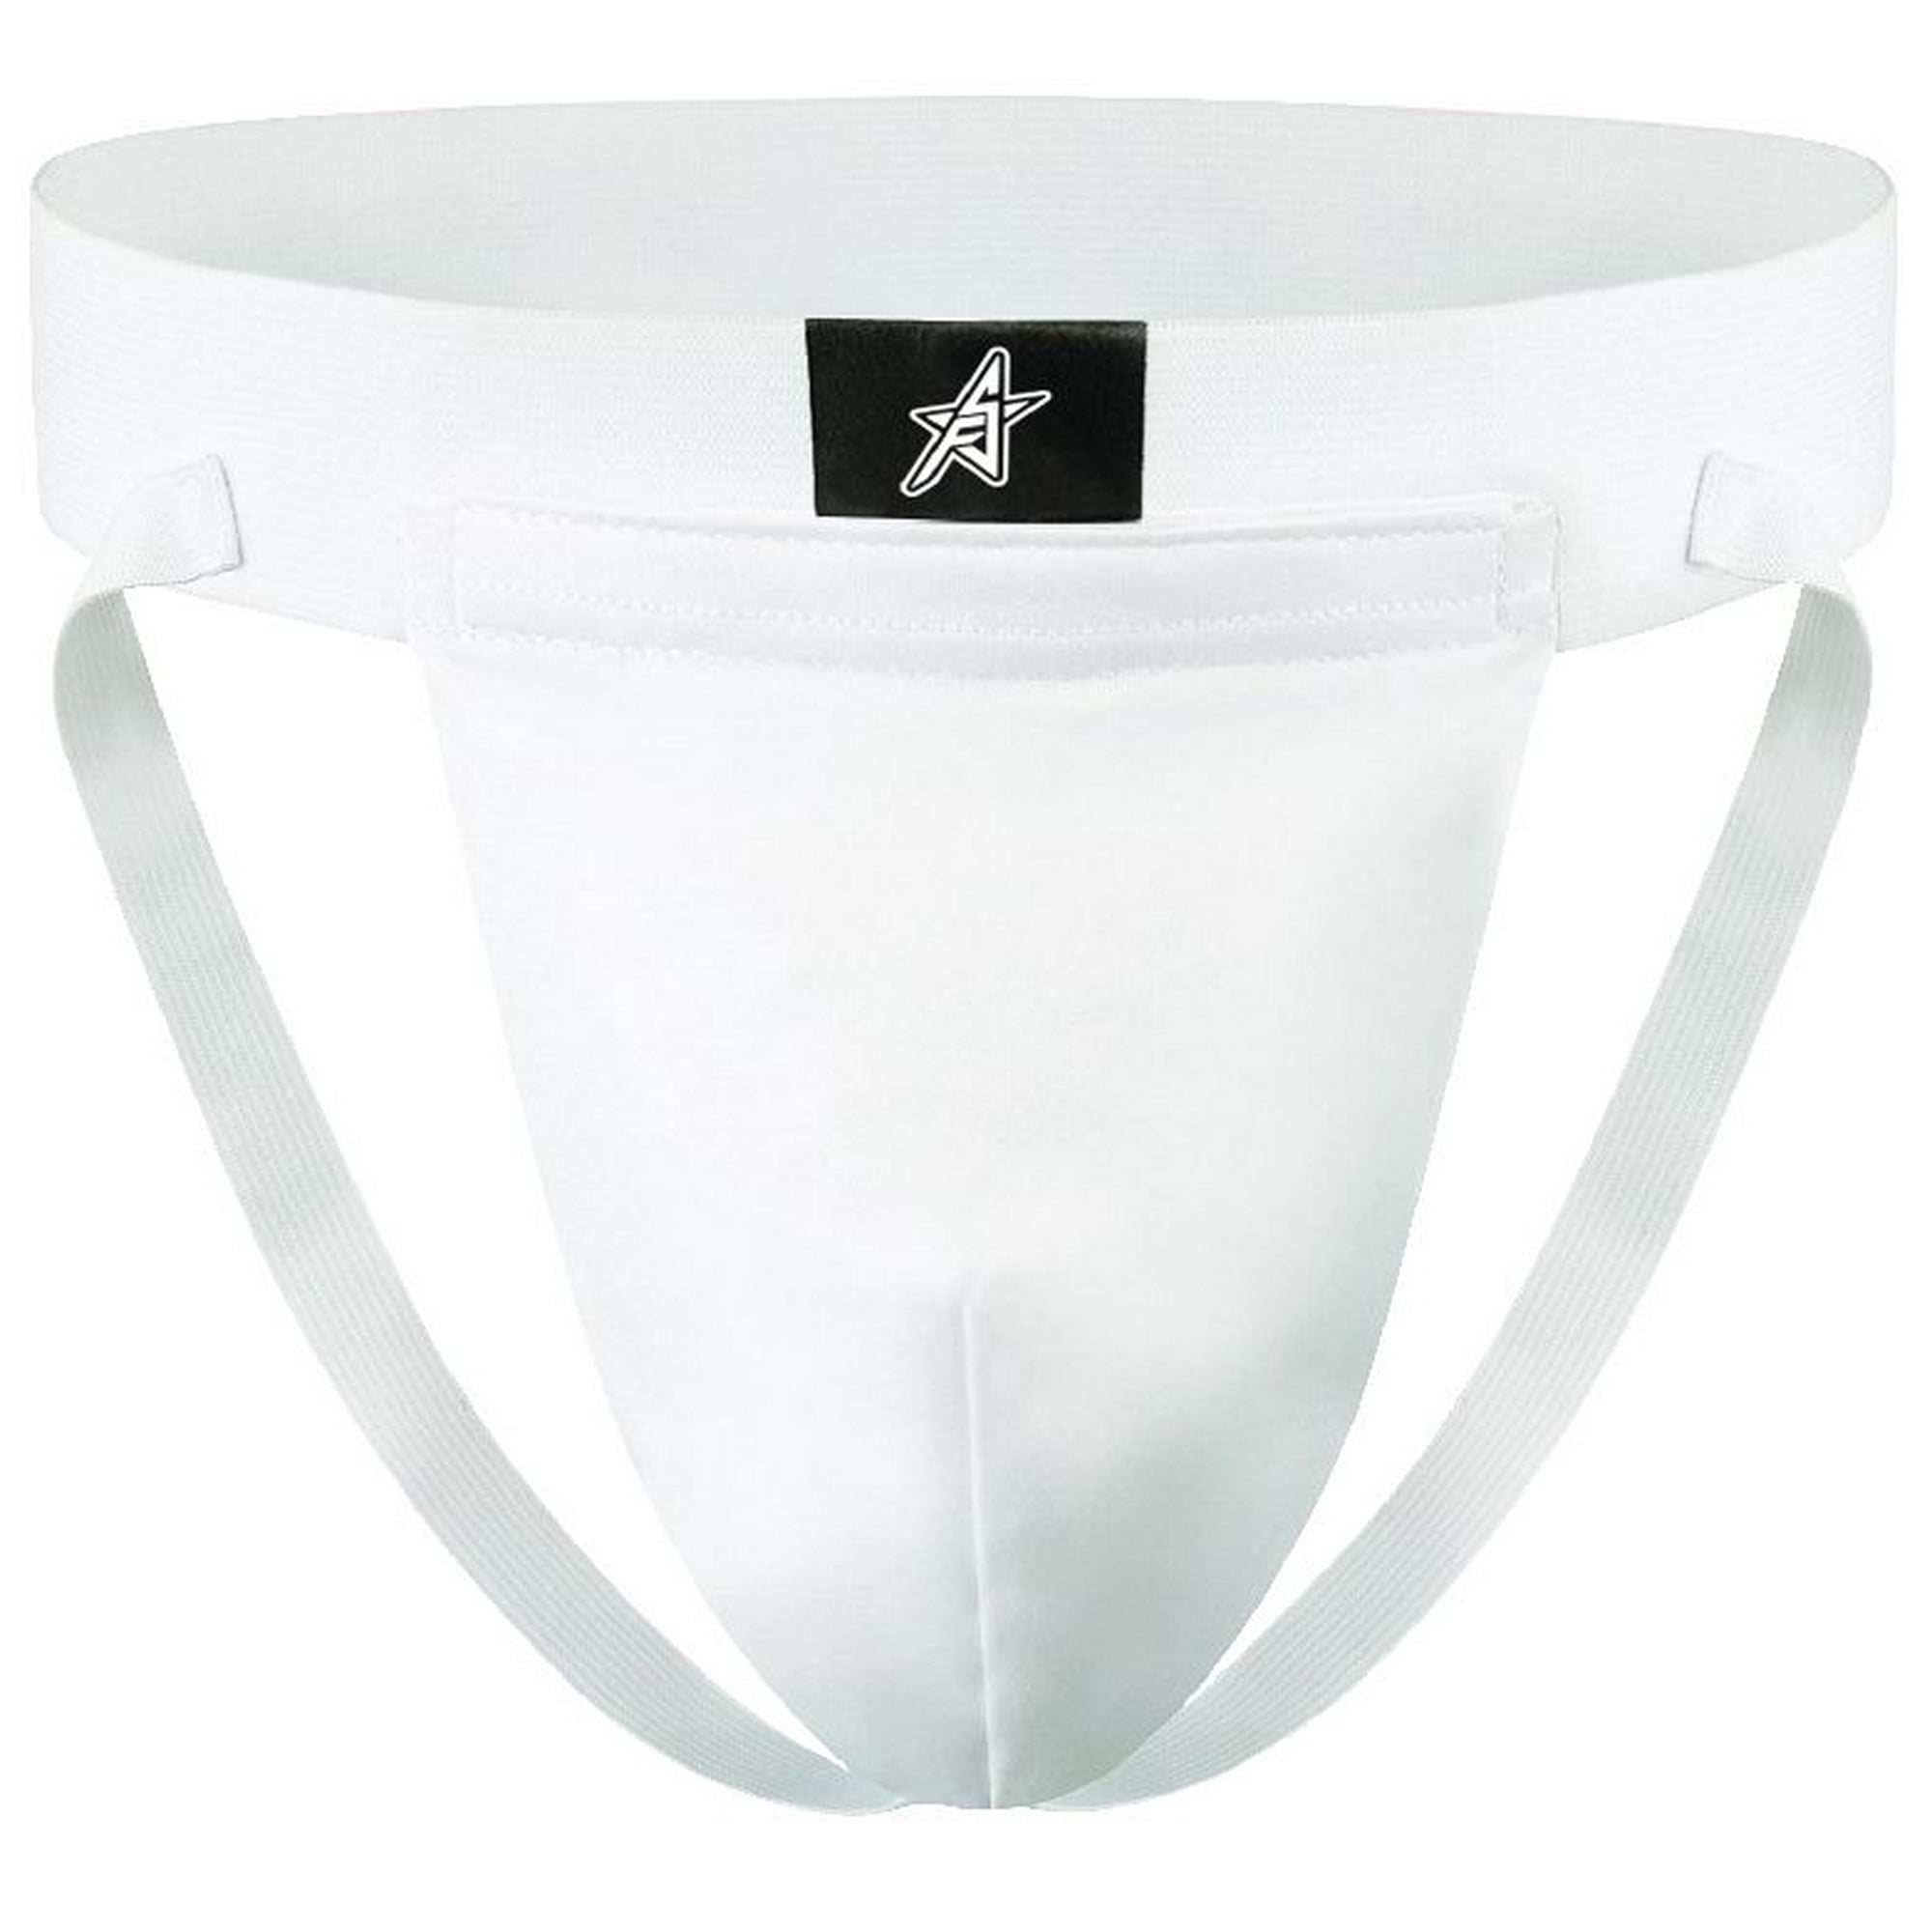 Vintage Bike Athletic cup supporter/Jockstrap - Boy's Small